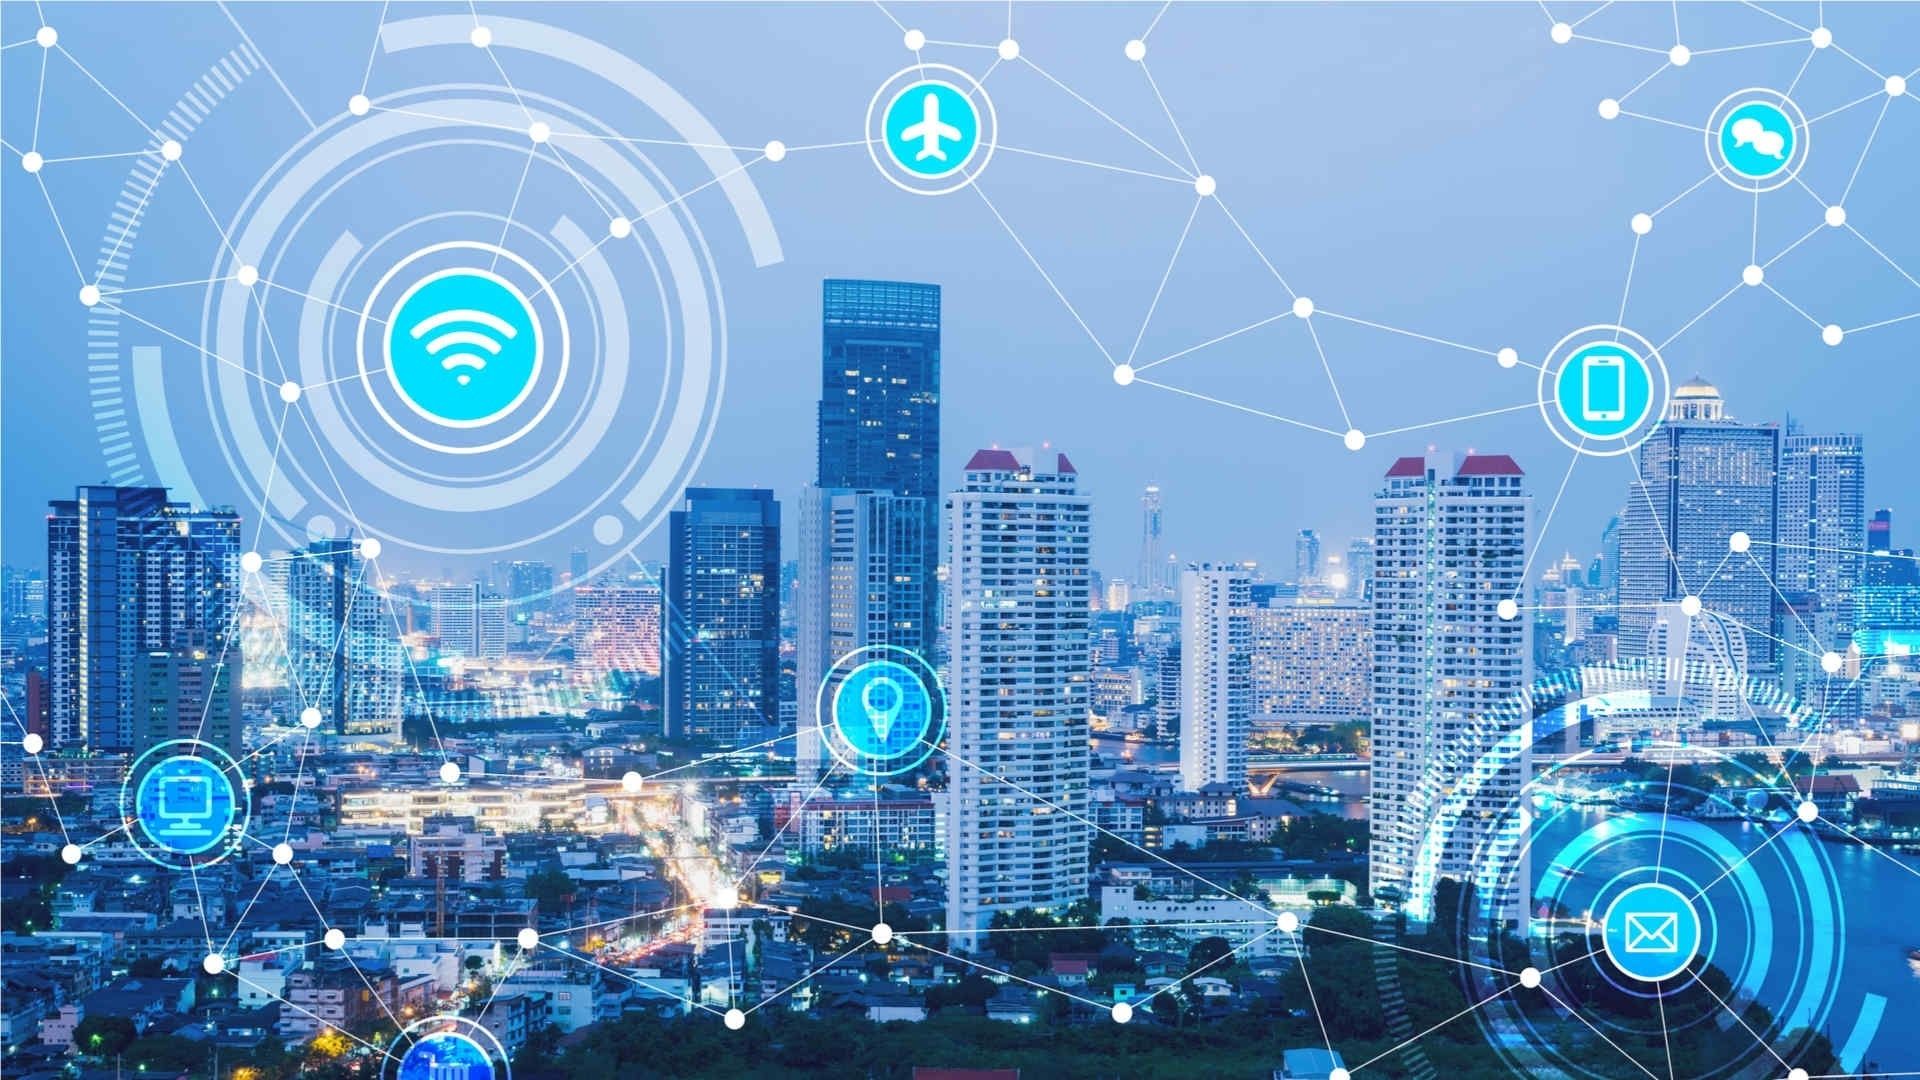 THE CITY OF THE FUTURE IS SMART: WHAT IS A SMART CITY?